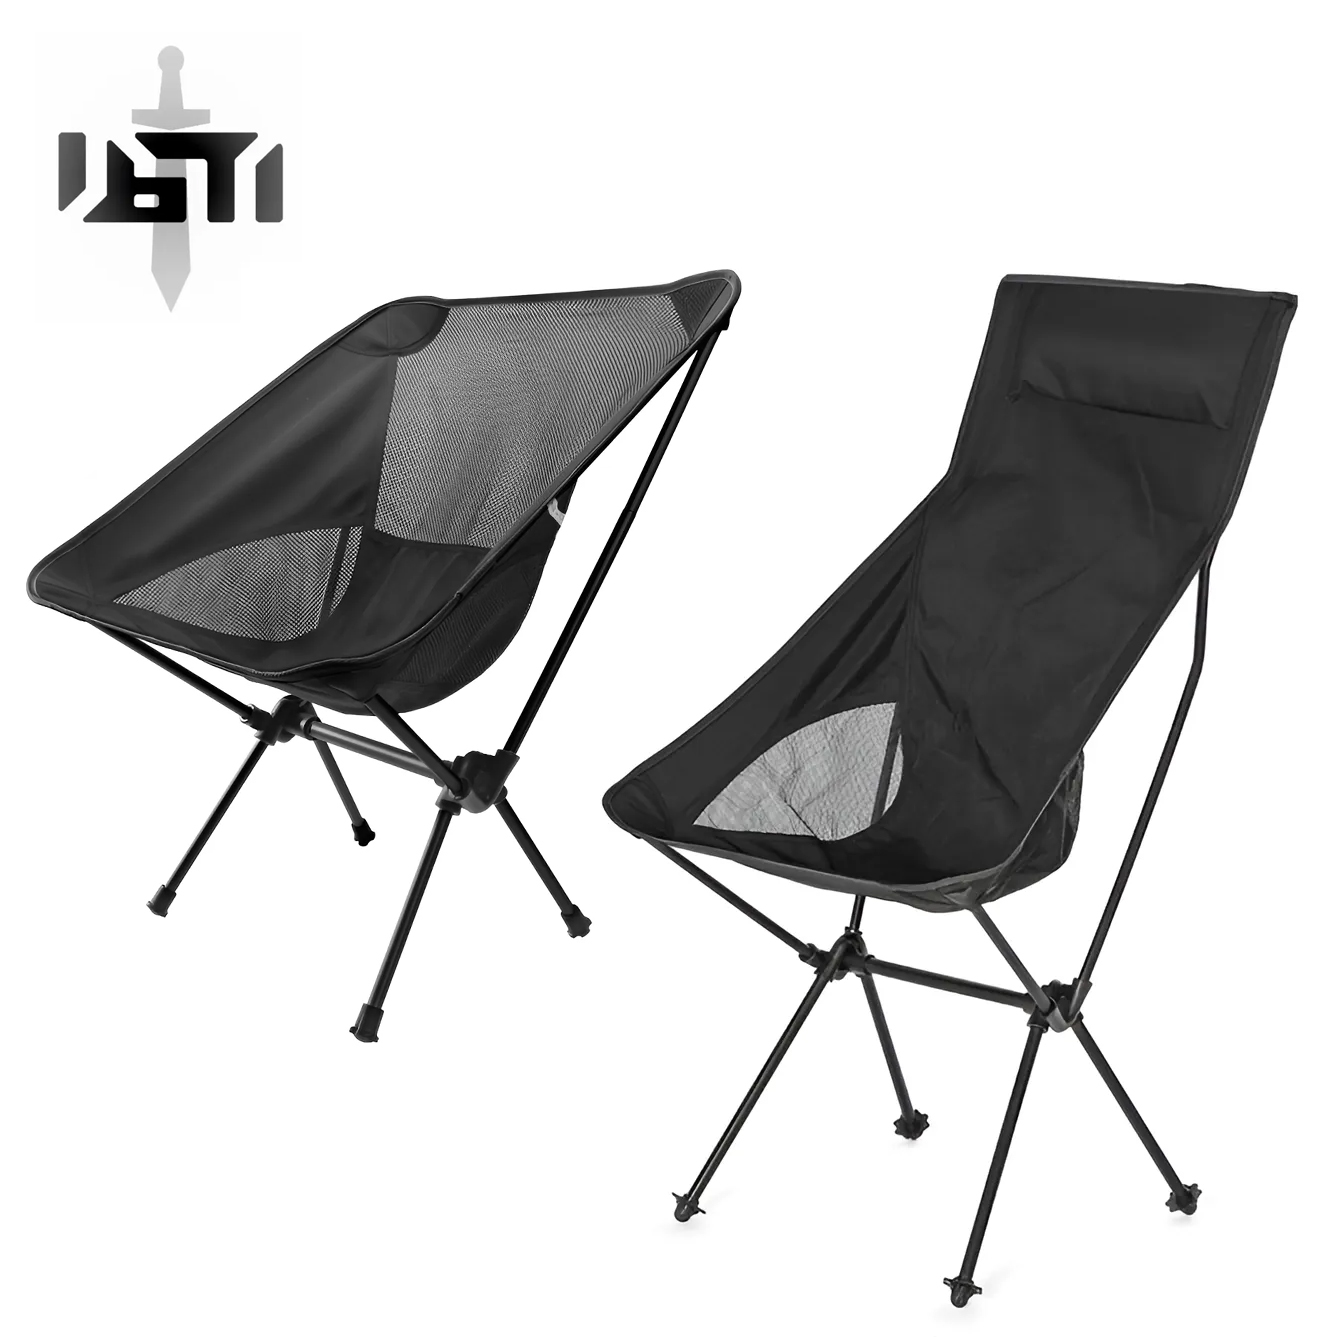 Black Stealth - Folding Compact Field Chair